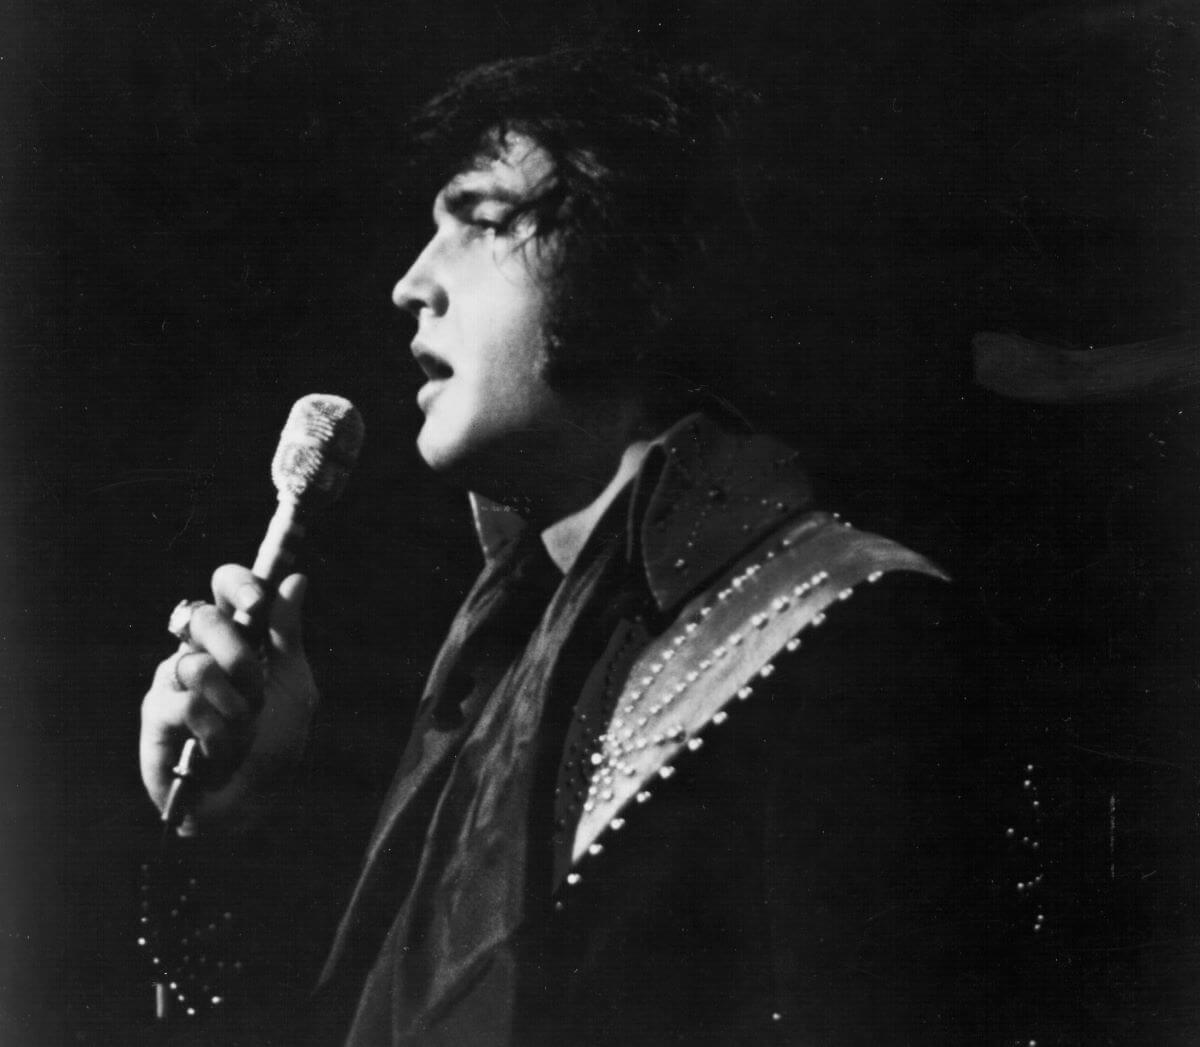 A black and white picture of Elvis in side profile, holding a microphone up to his face.